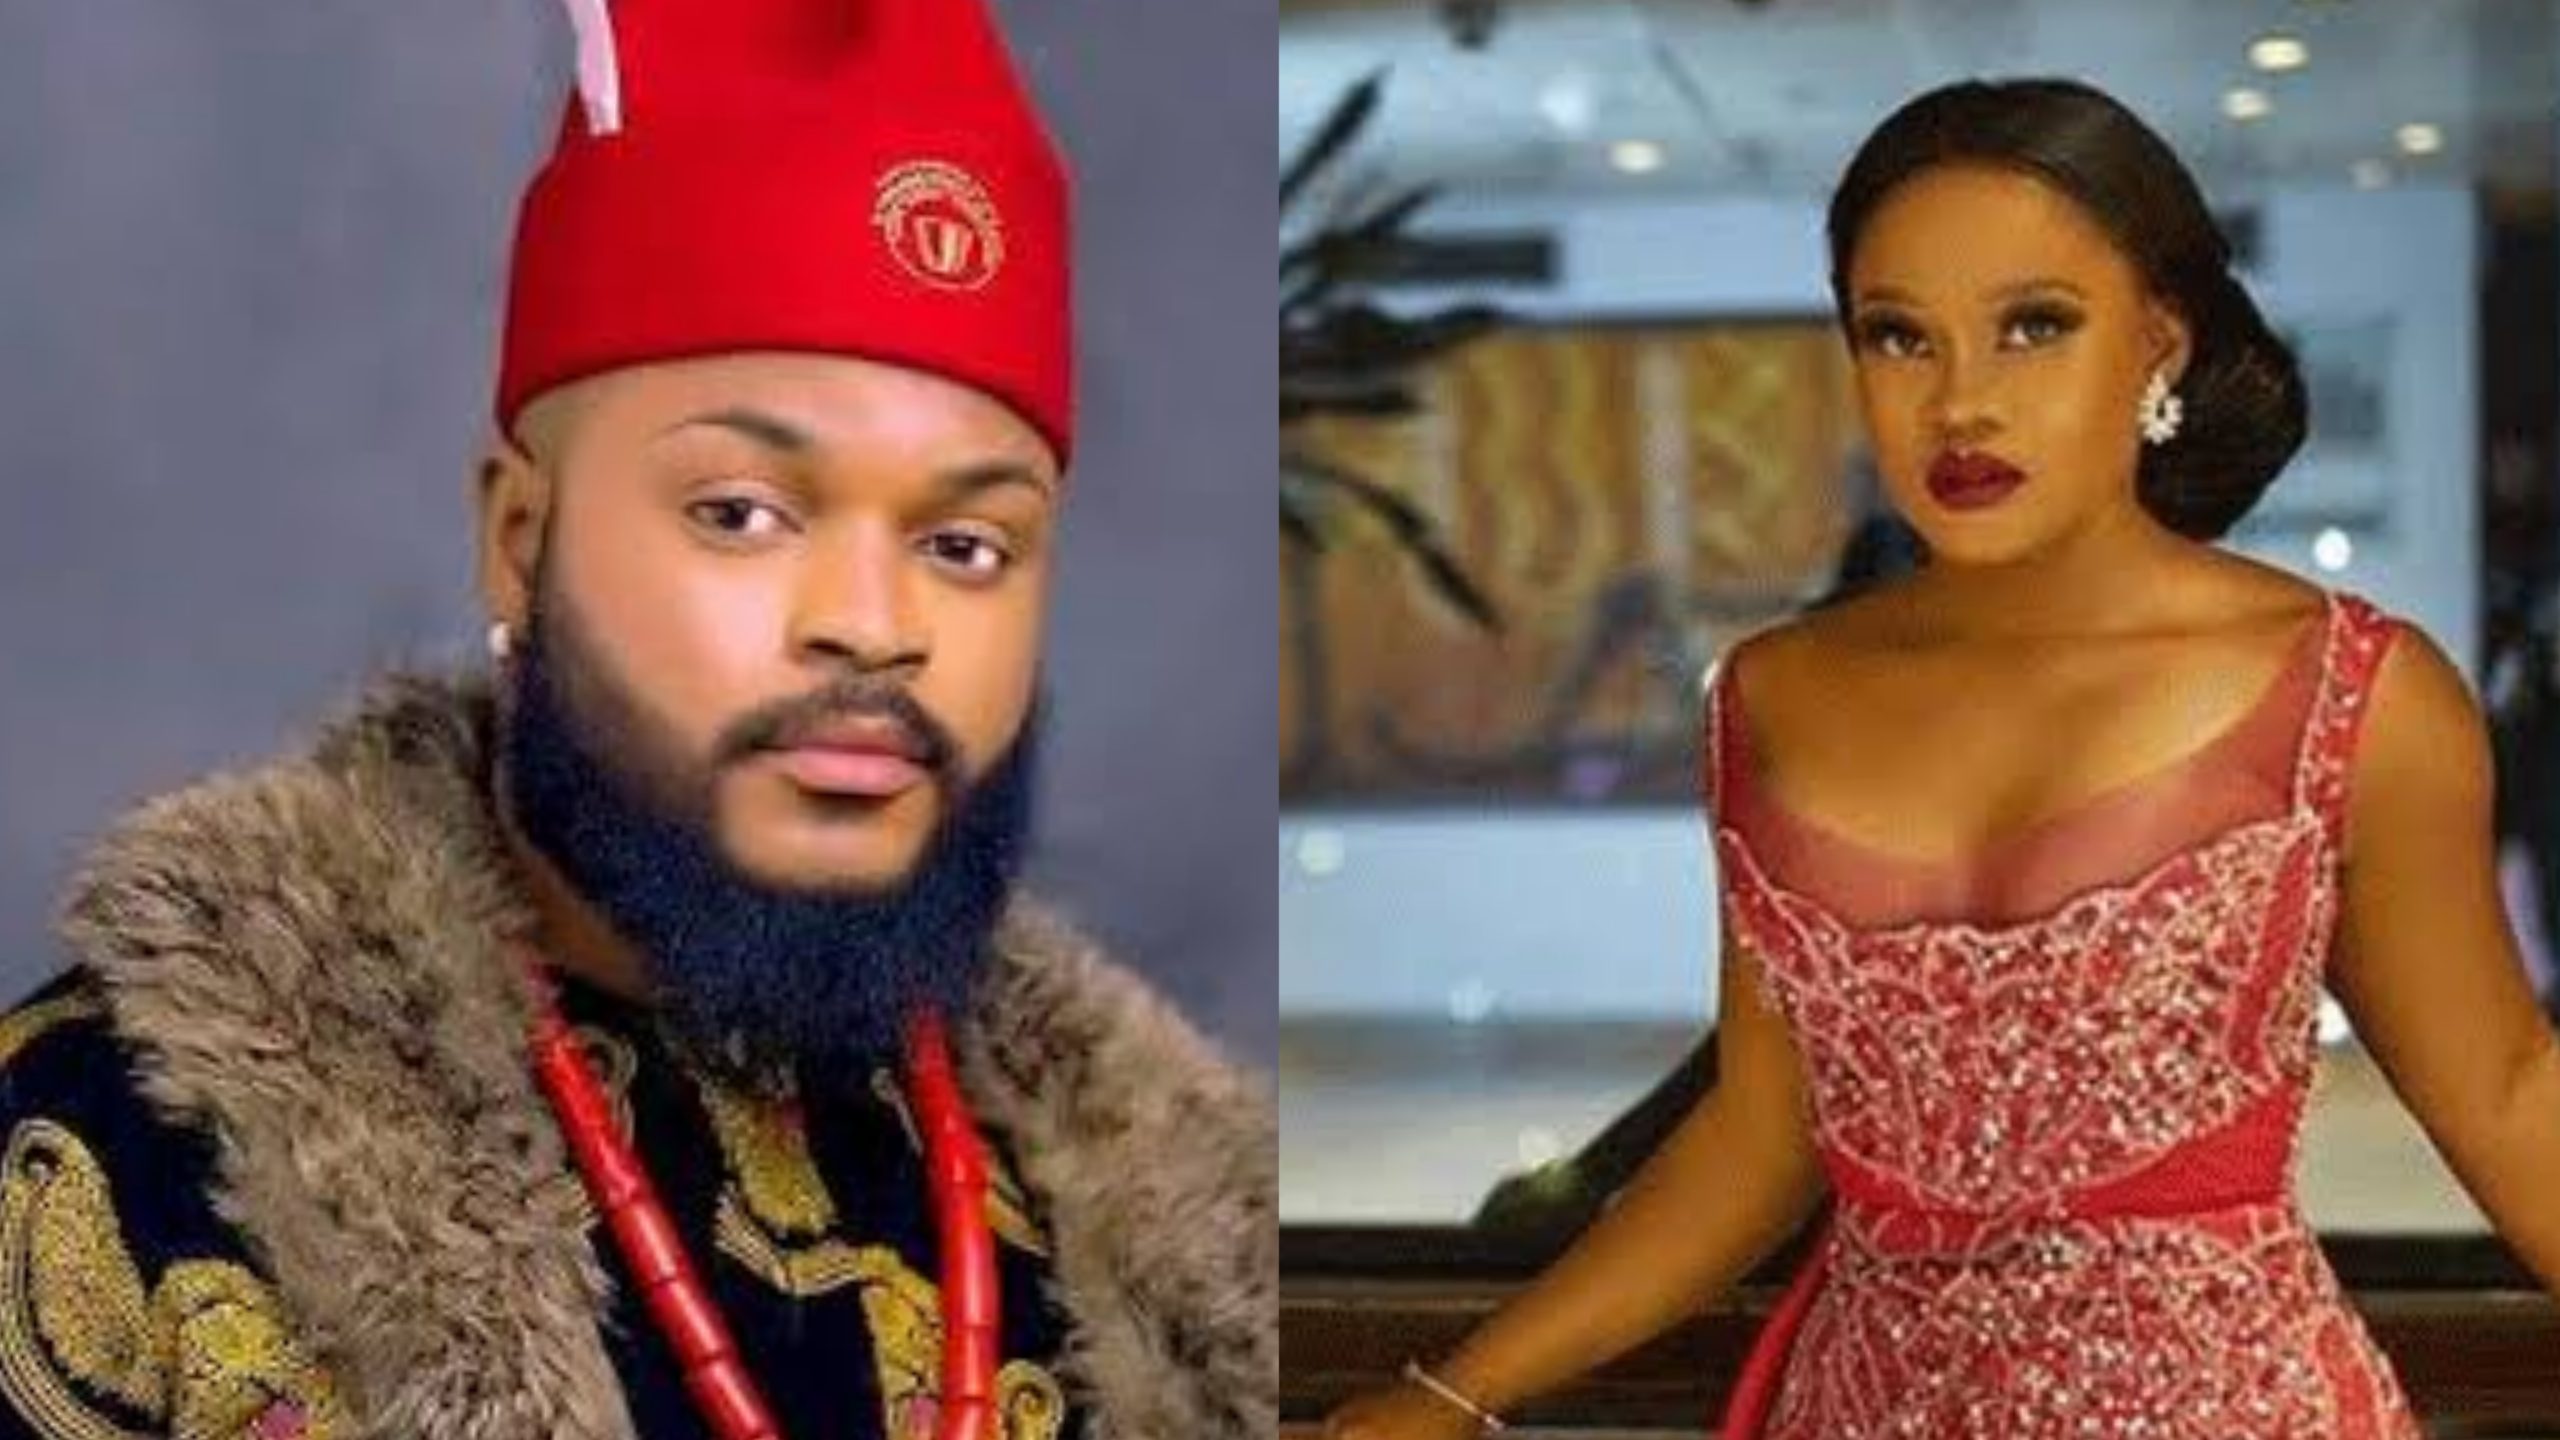 “There shoild be a limit to the insult, I have two chieftaincy titles and a 3rd one on the way” – Whitemoney airs beef with CeeC [Video]